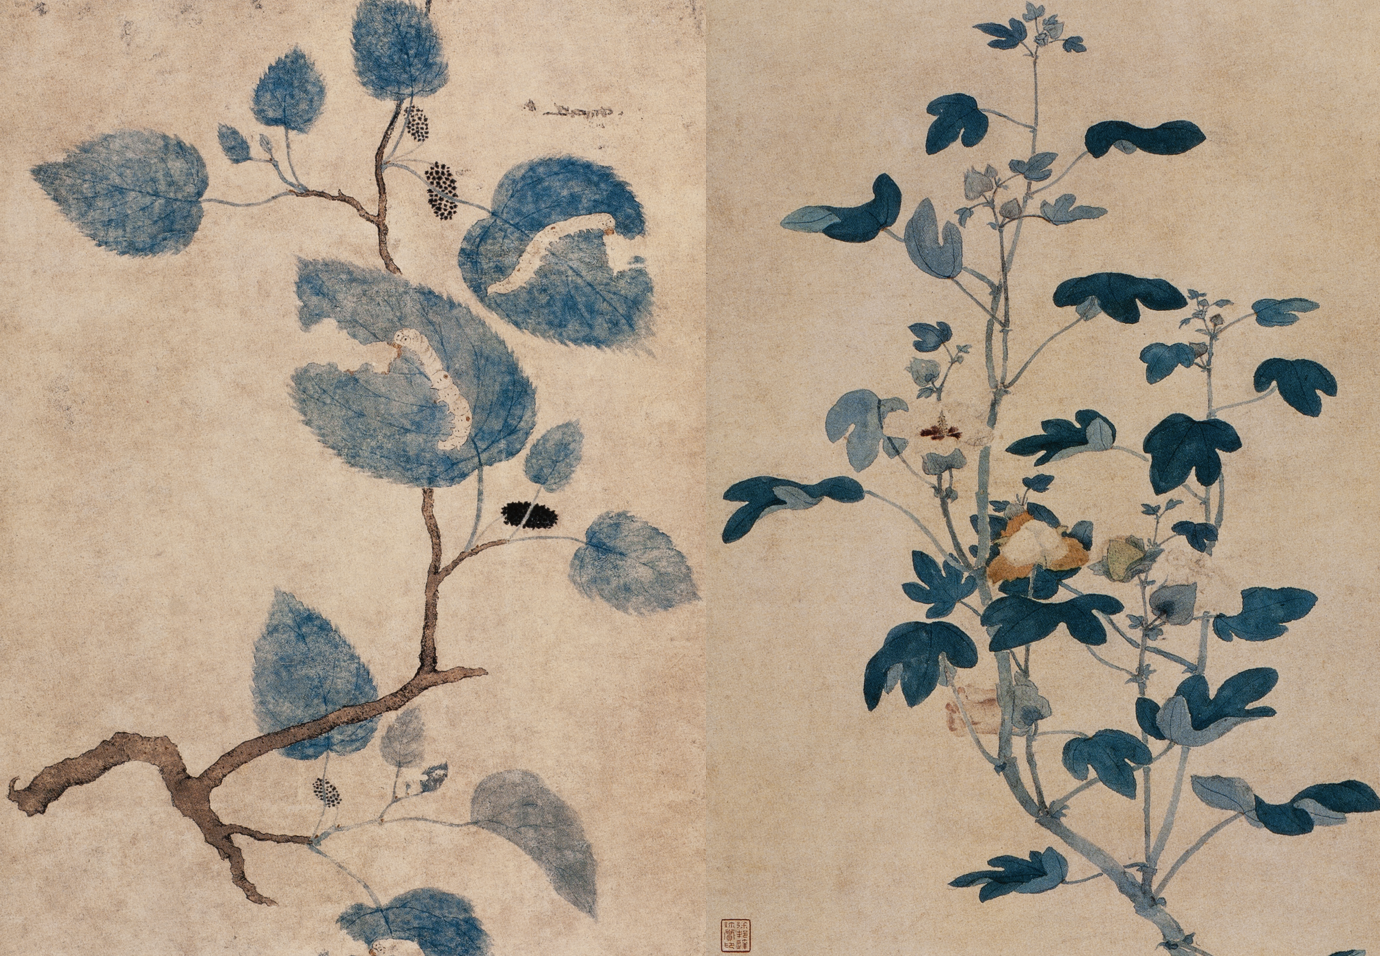 Pair of Fifteenth-Century Chinese Paintings Depicting Gossypium and Mulberry